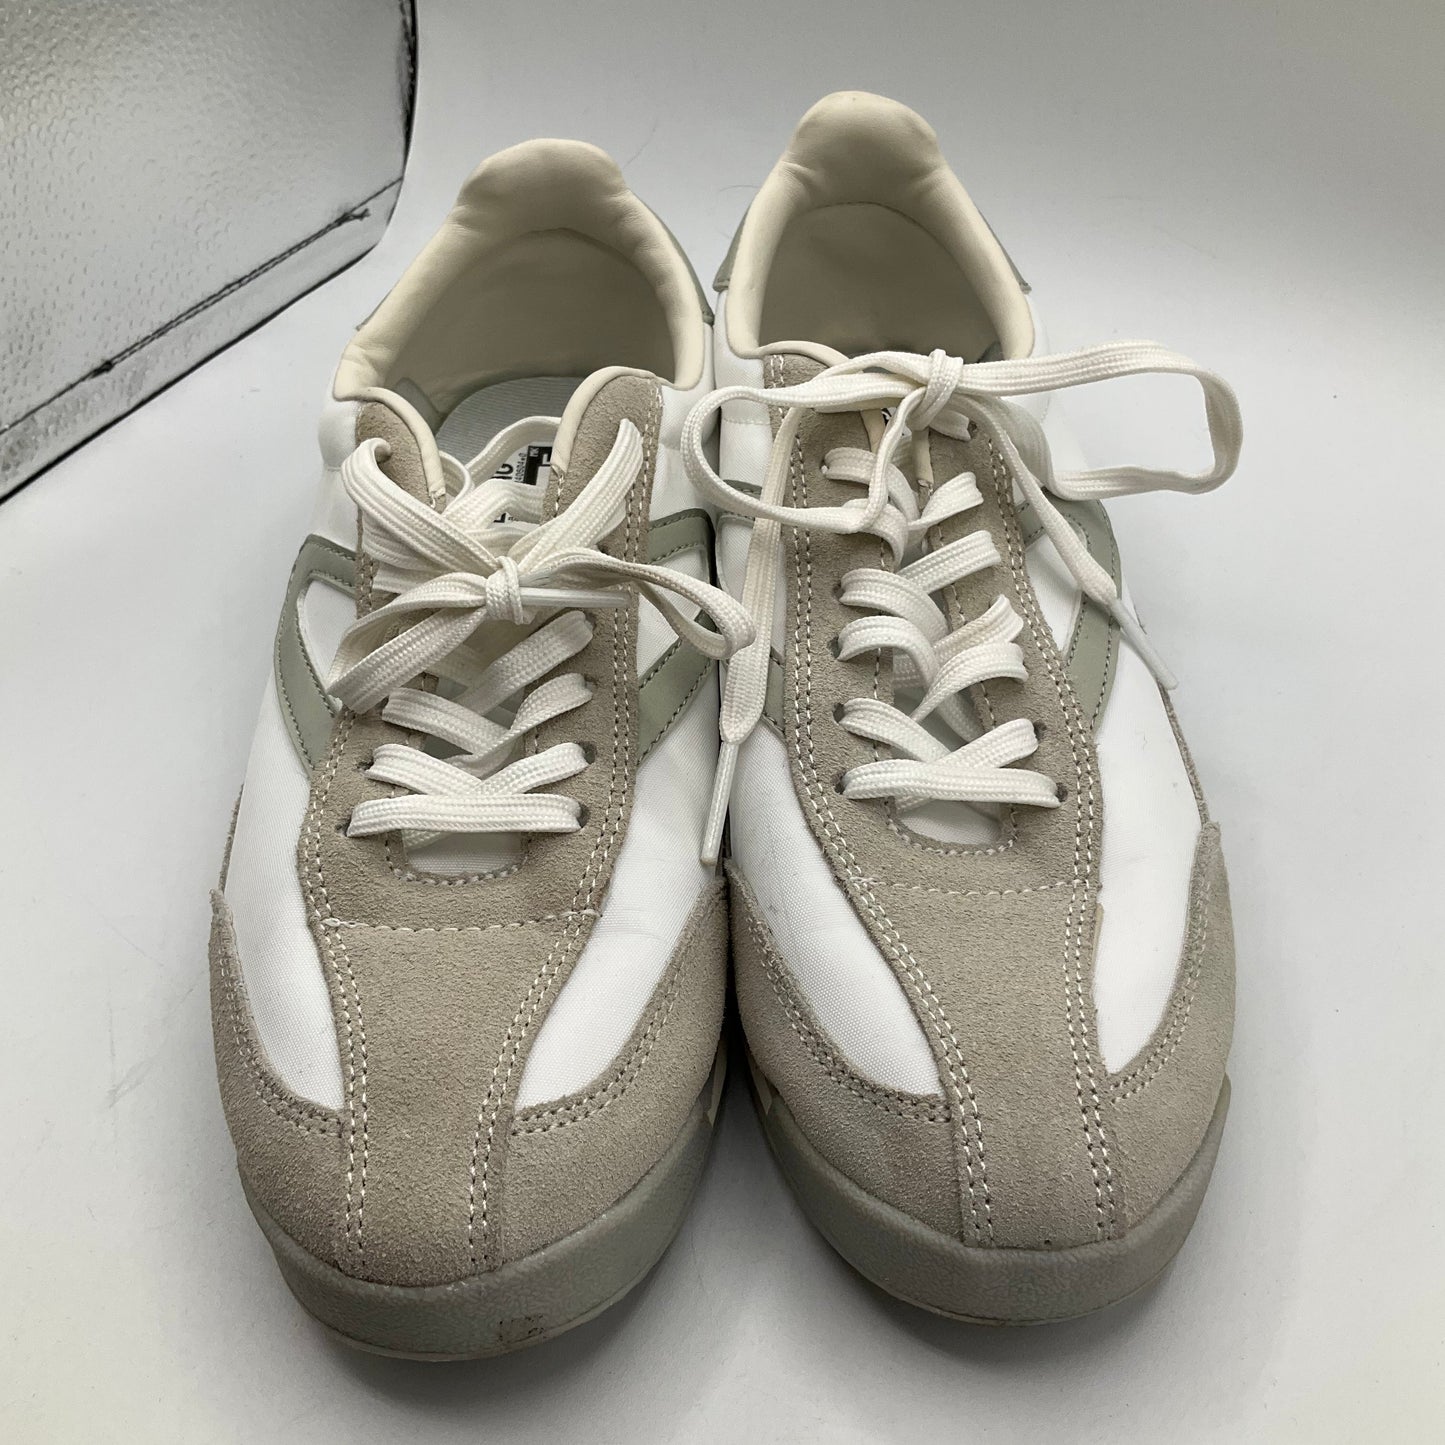 White Shoes Sneakers Cmb, Size 6.5